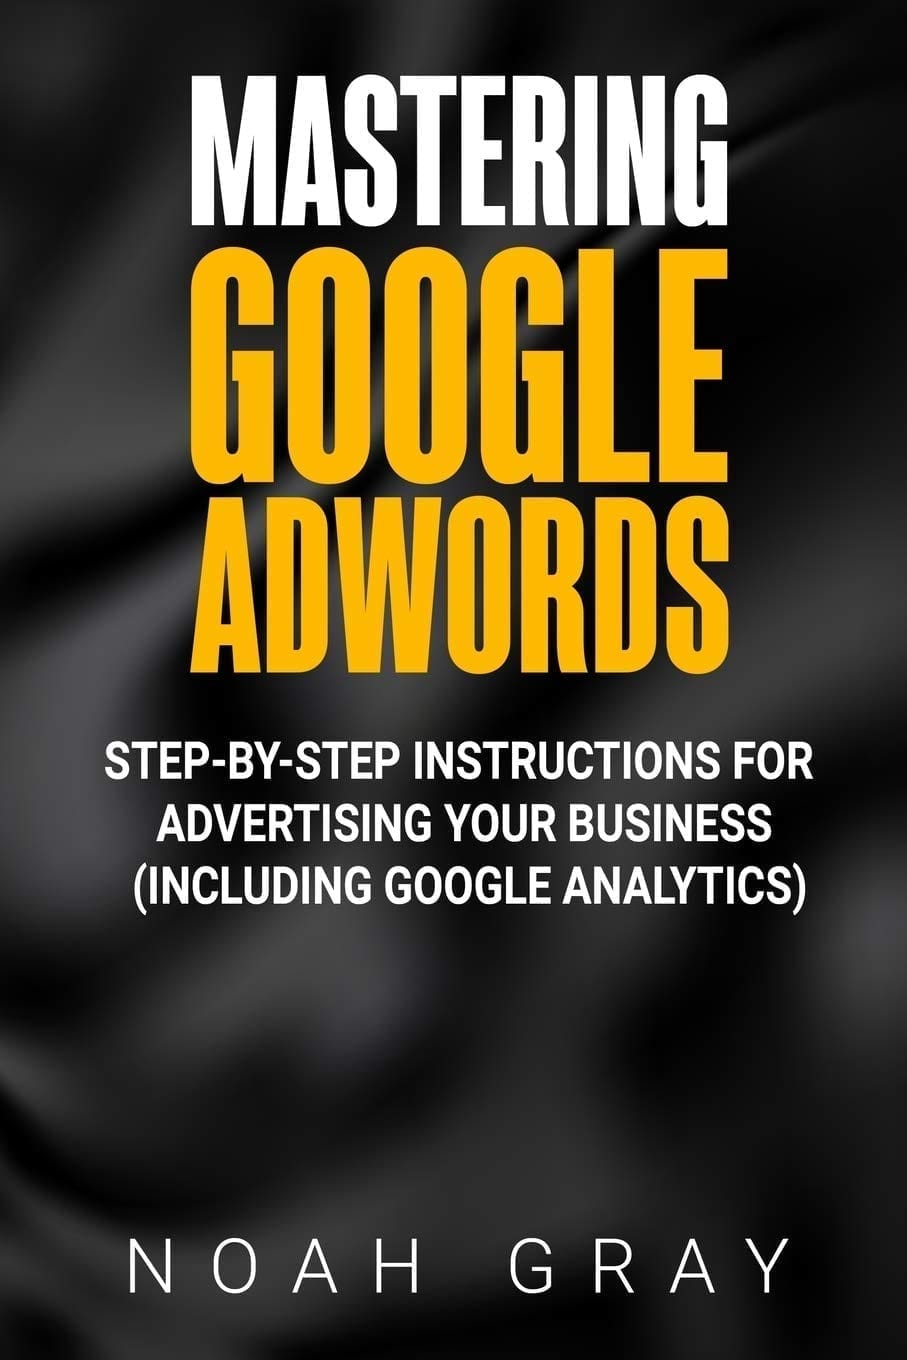 AdWords Step by Step by Noah Gray